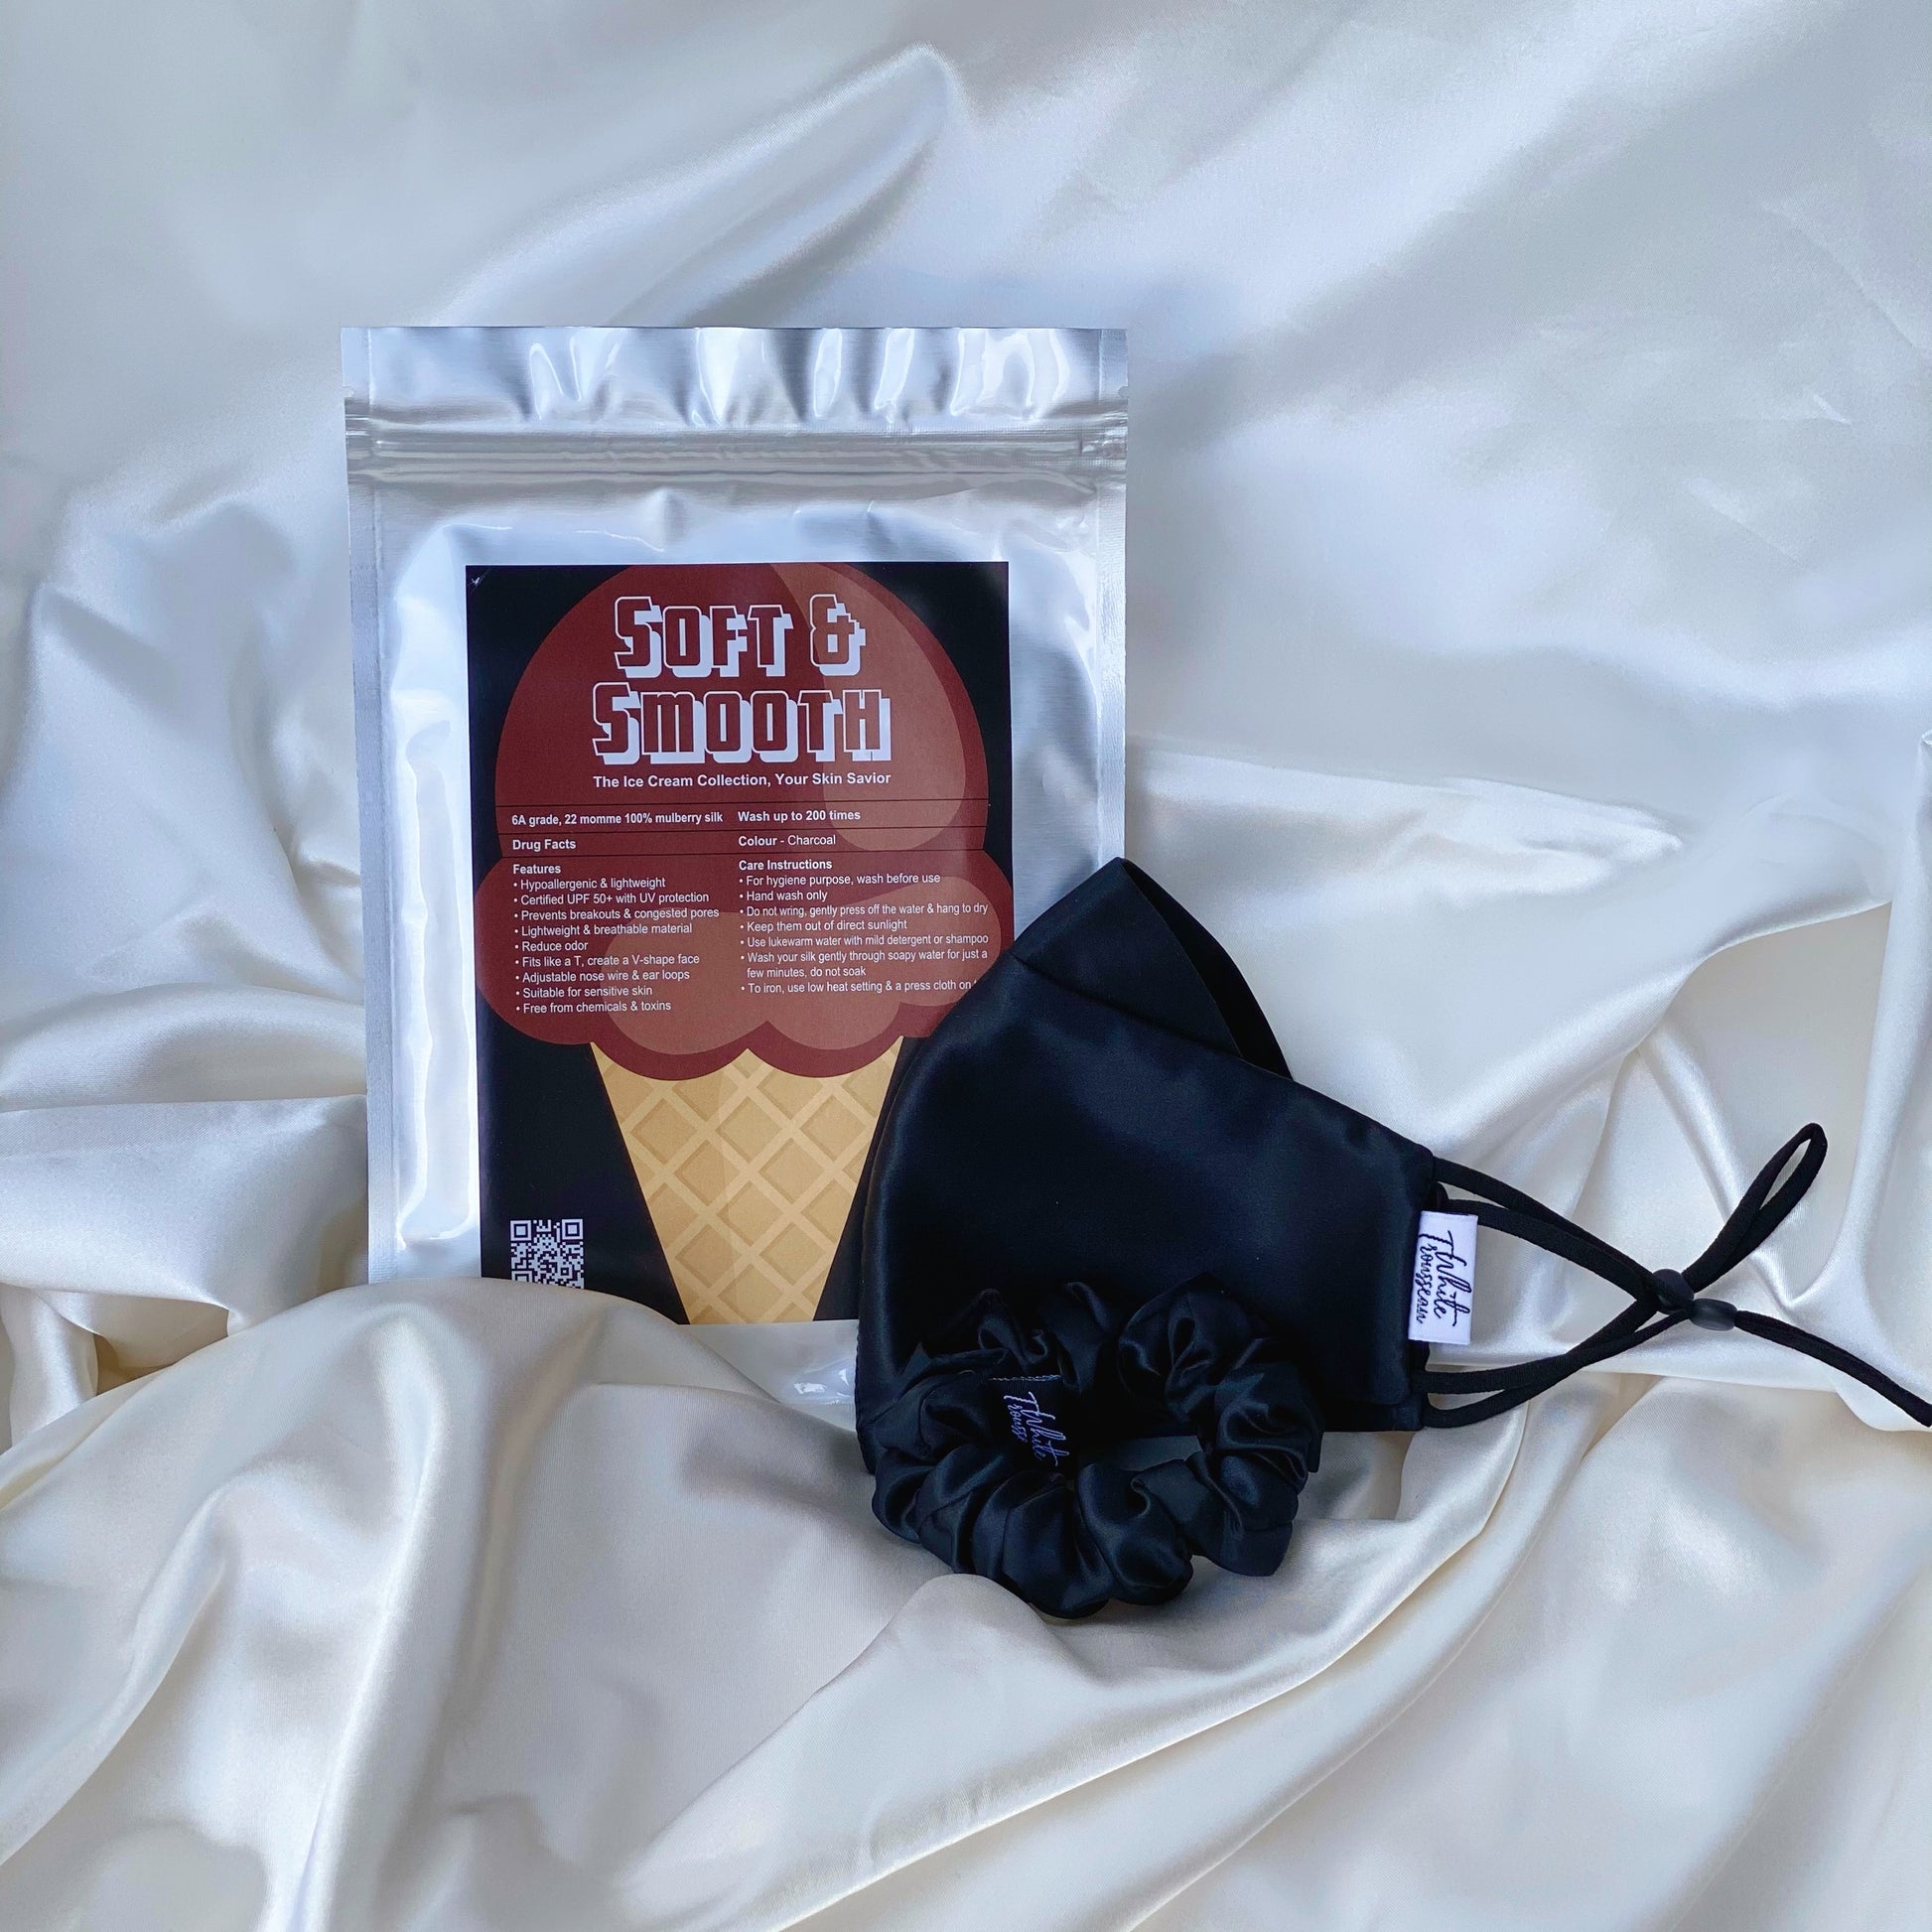 Gifting on a budget? Our Beauty Starter Kit is a great affordable gift option, consisting of two high quality, practical items that every woman needs today - a silk mask and scrunchie! Opt for our embroidery services for customised silk masks to make your gift extra special!